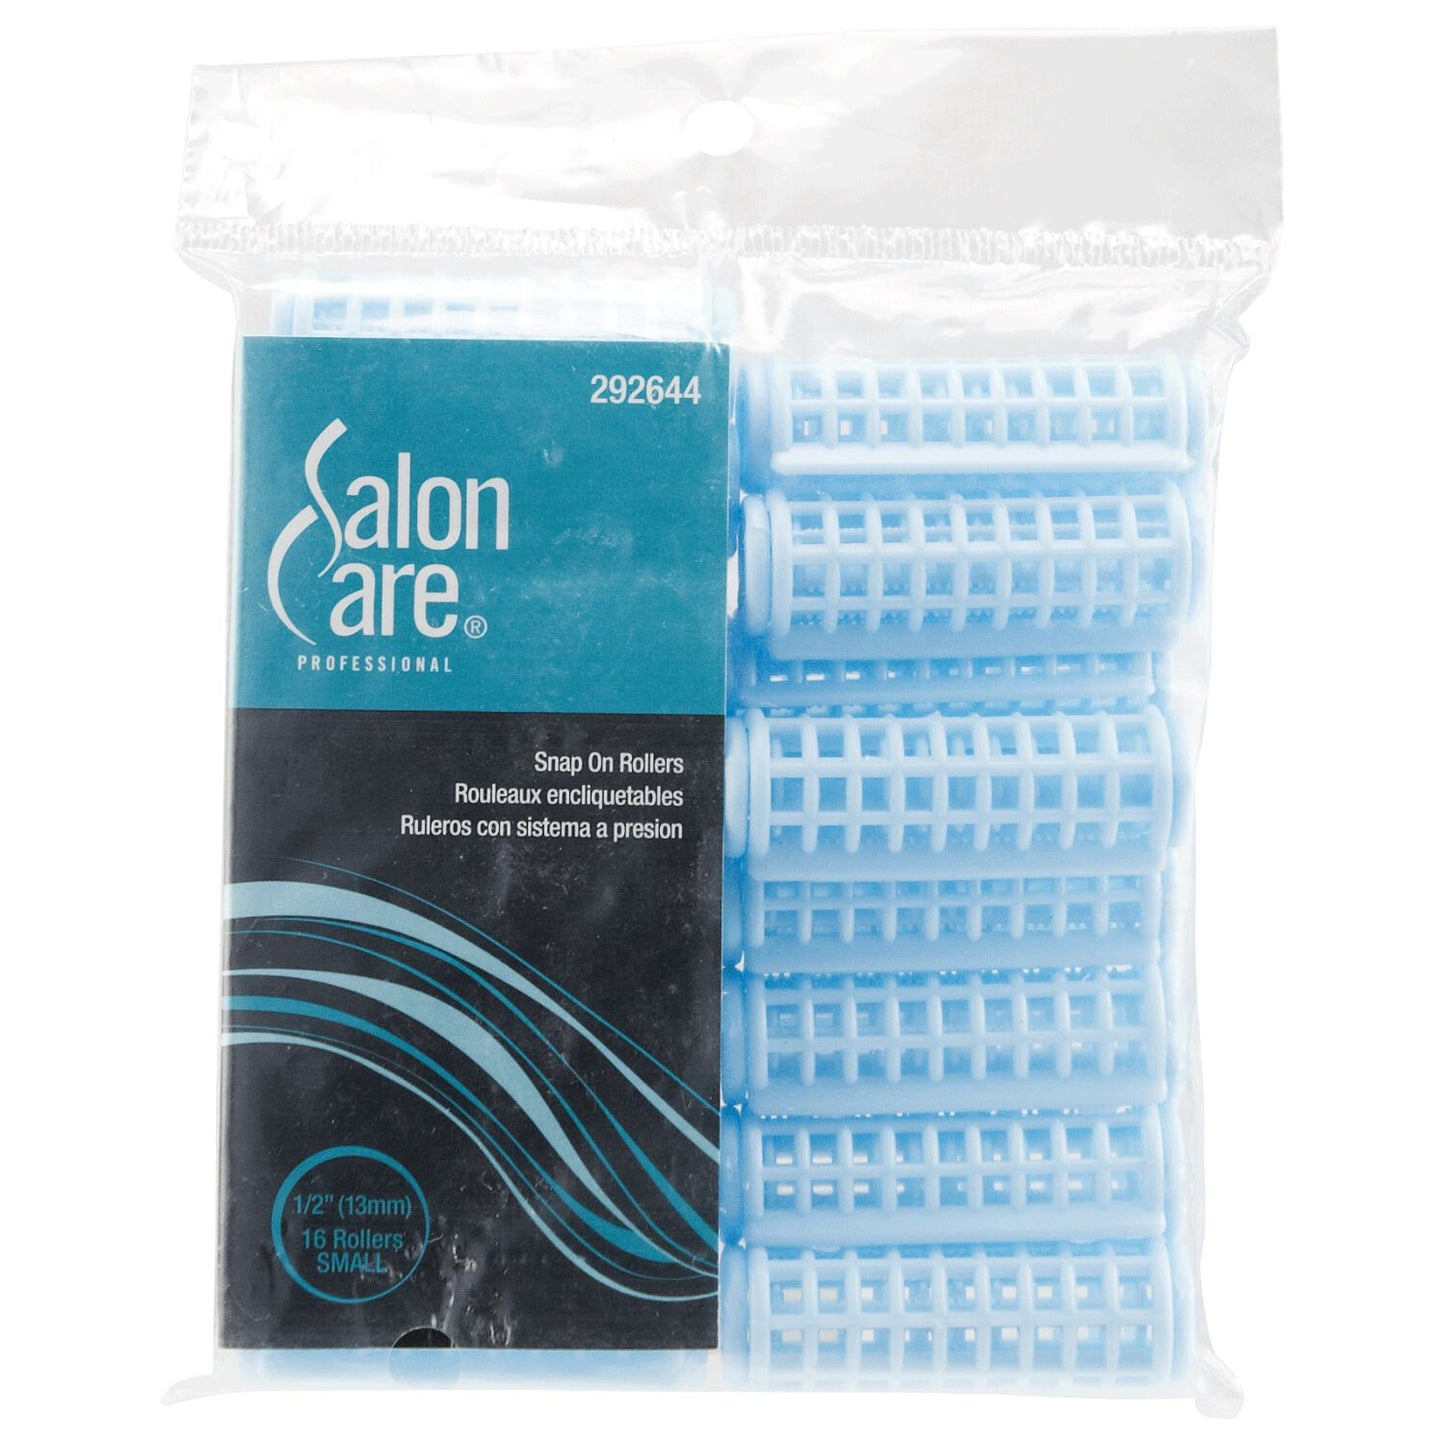 Salon Care Snap-On Rollers